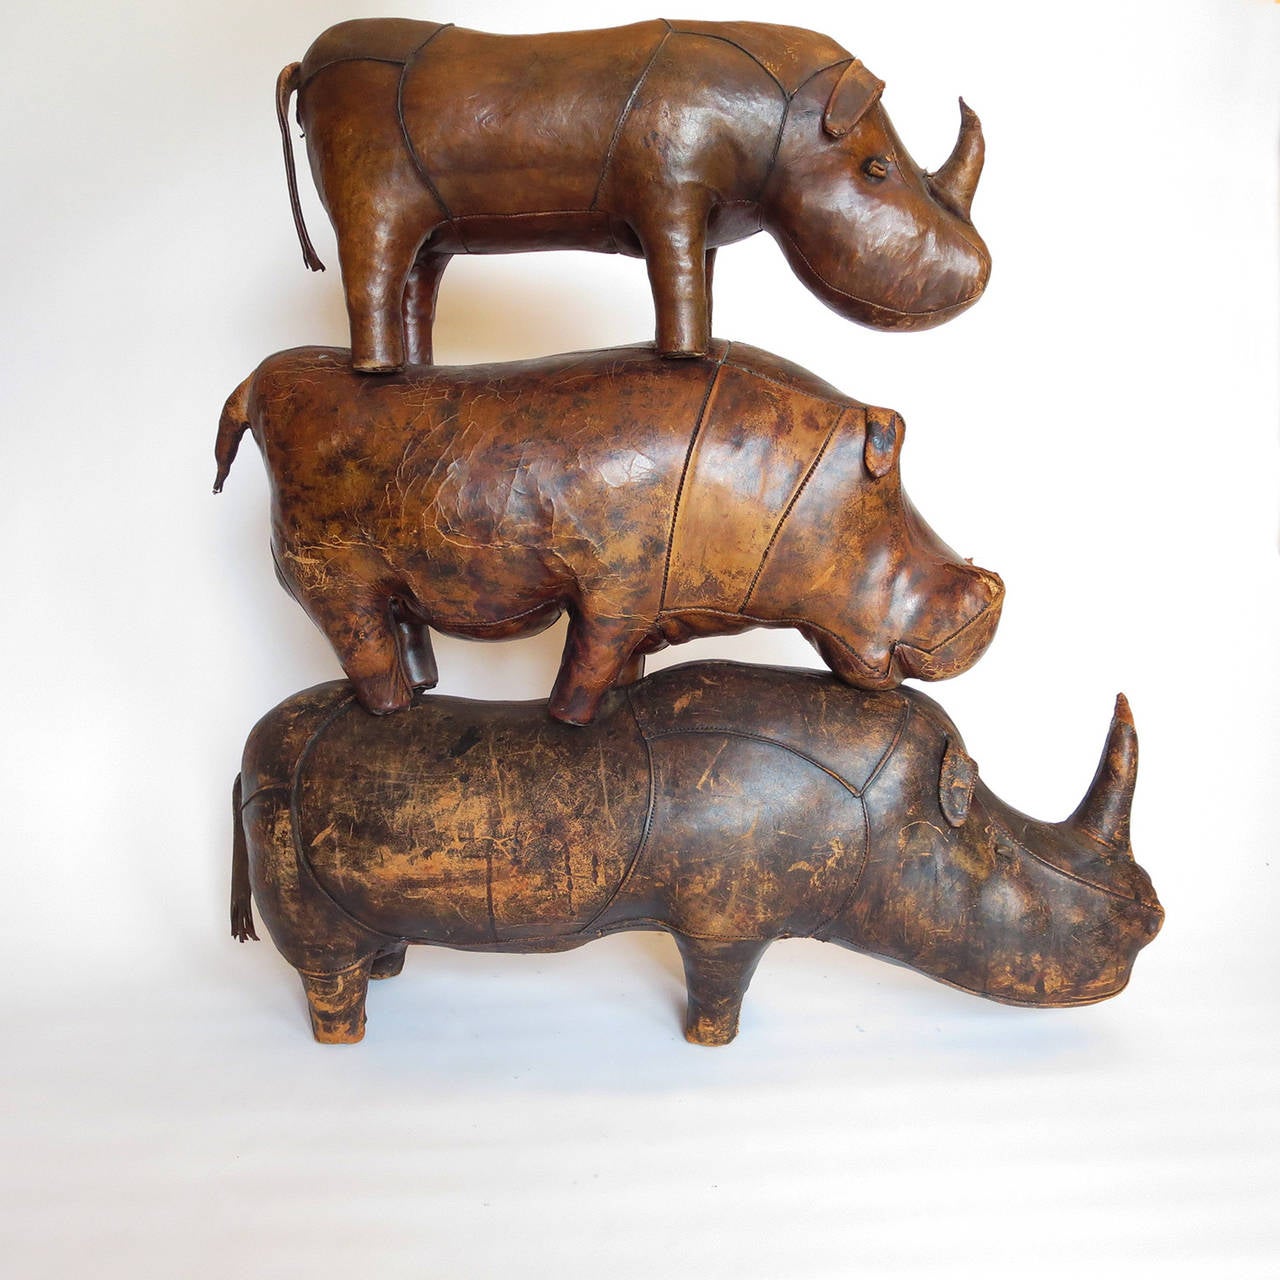 Here's a unique opportunity to gather your own herd of Abercrombie animals in one place! Deigned in the 1960s for Abercrombie and Fitch, the animals were meant as footstools. They are all leather covered, and show appropriate wear of age. The hippo